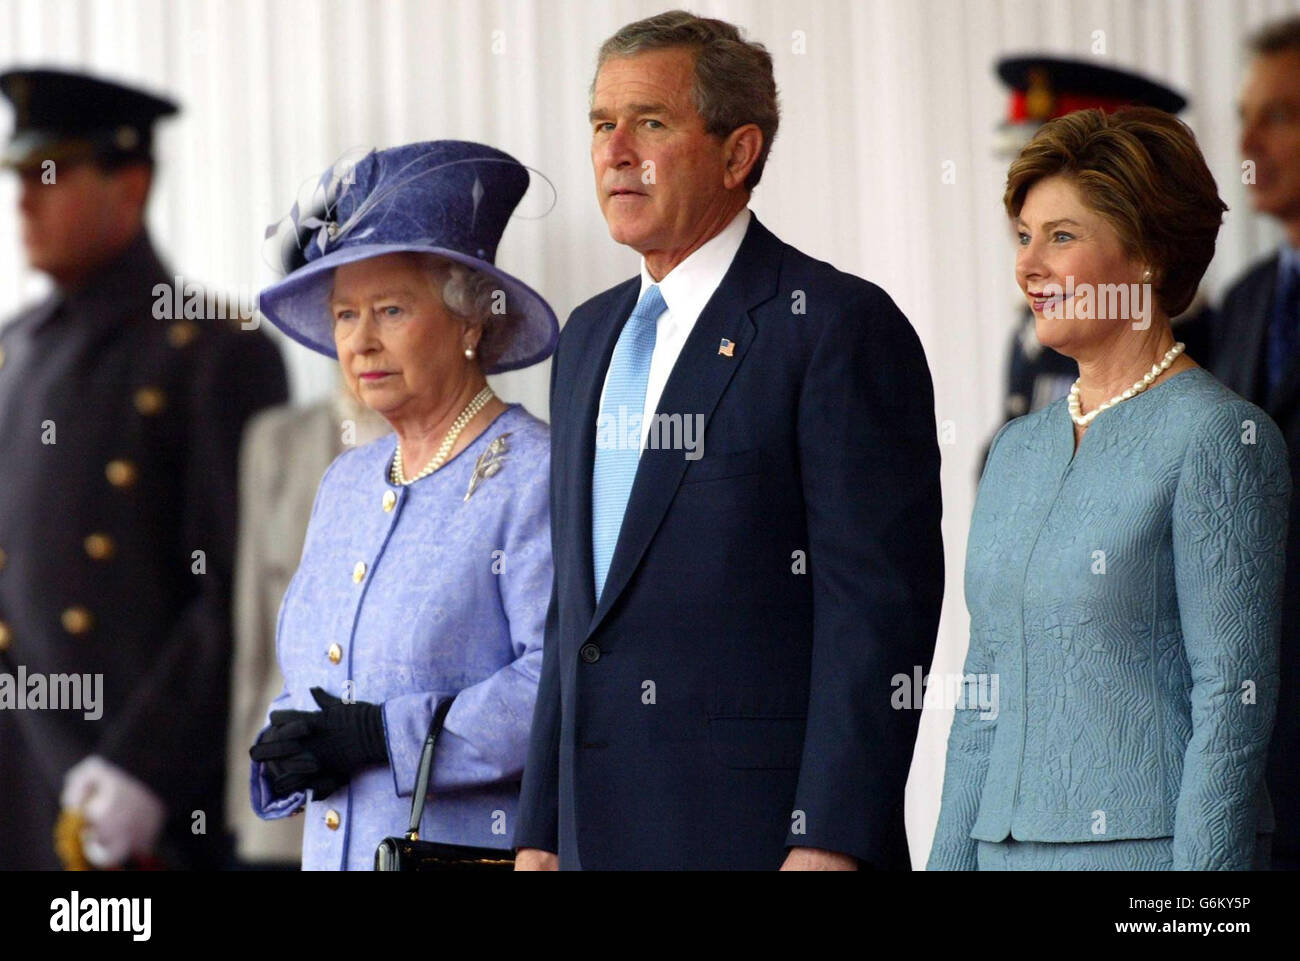 US President George W Bush and his wife Laura (right) receive a ceremonial welcome as they stand with Britain's Queen Elizabeth II, at Buckingham Palace, London. A massive security operation is in place in the capital for the state visit of America's President Bush, who is staying at the Palace as a guest of The Queen. Stock Photo